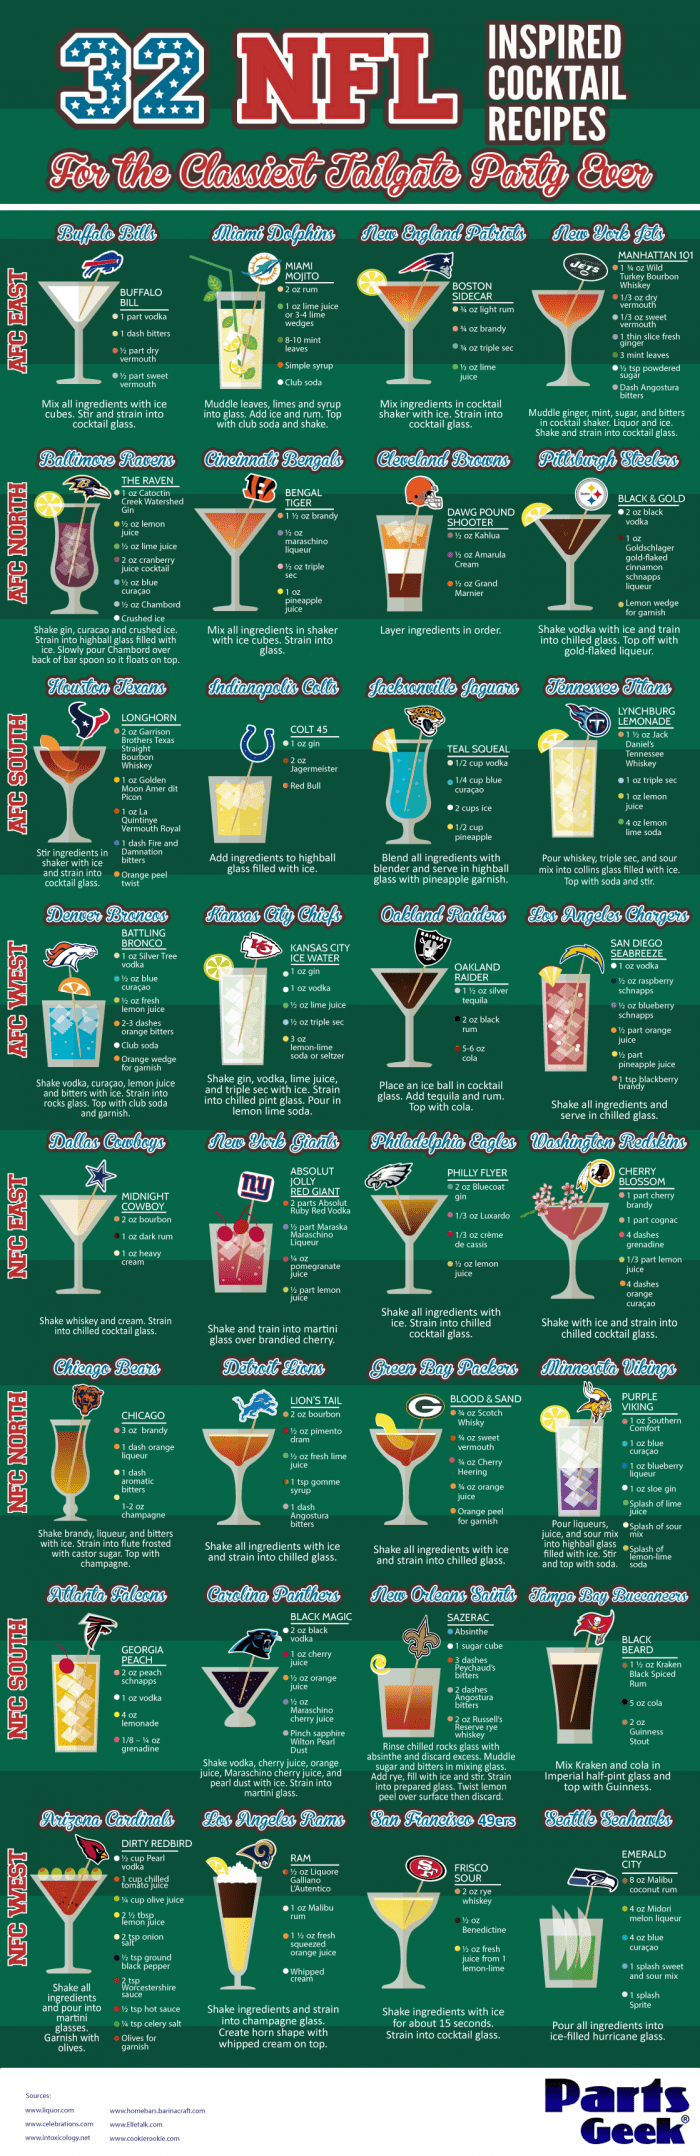 NFL cocktail recipes inspired by football tailgaters